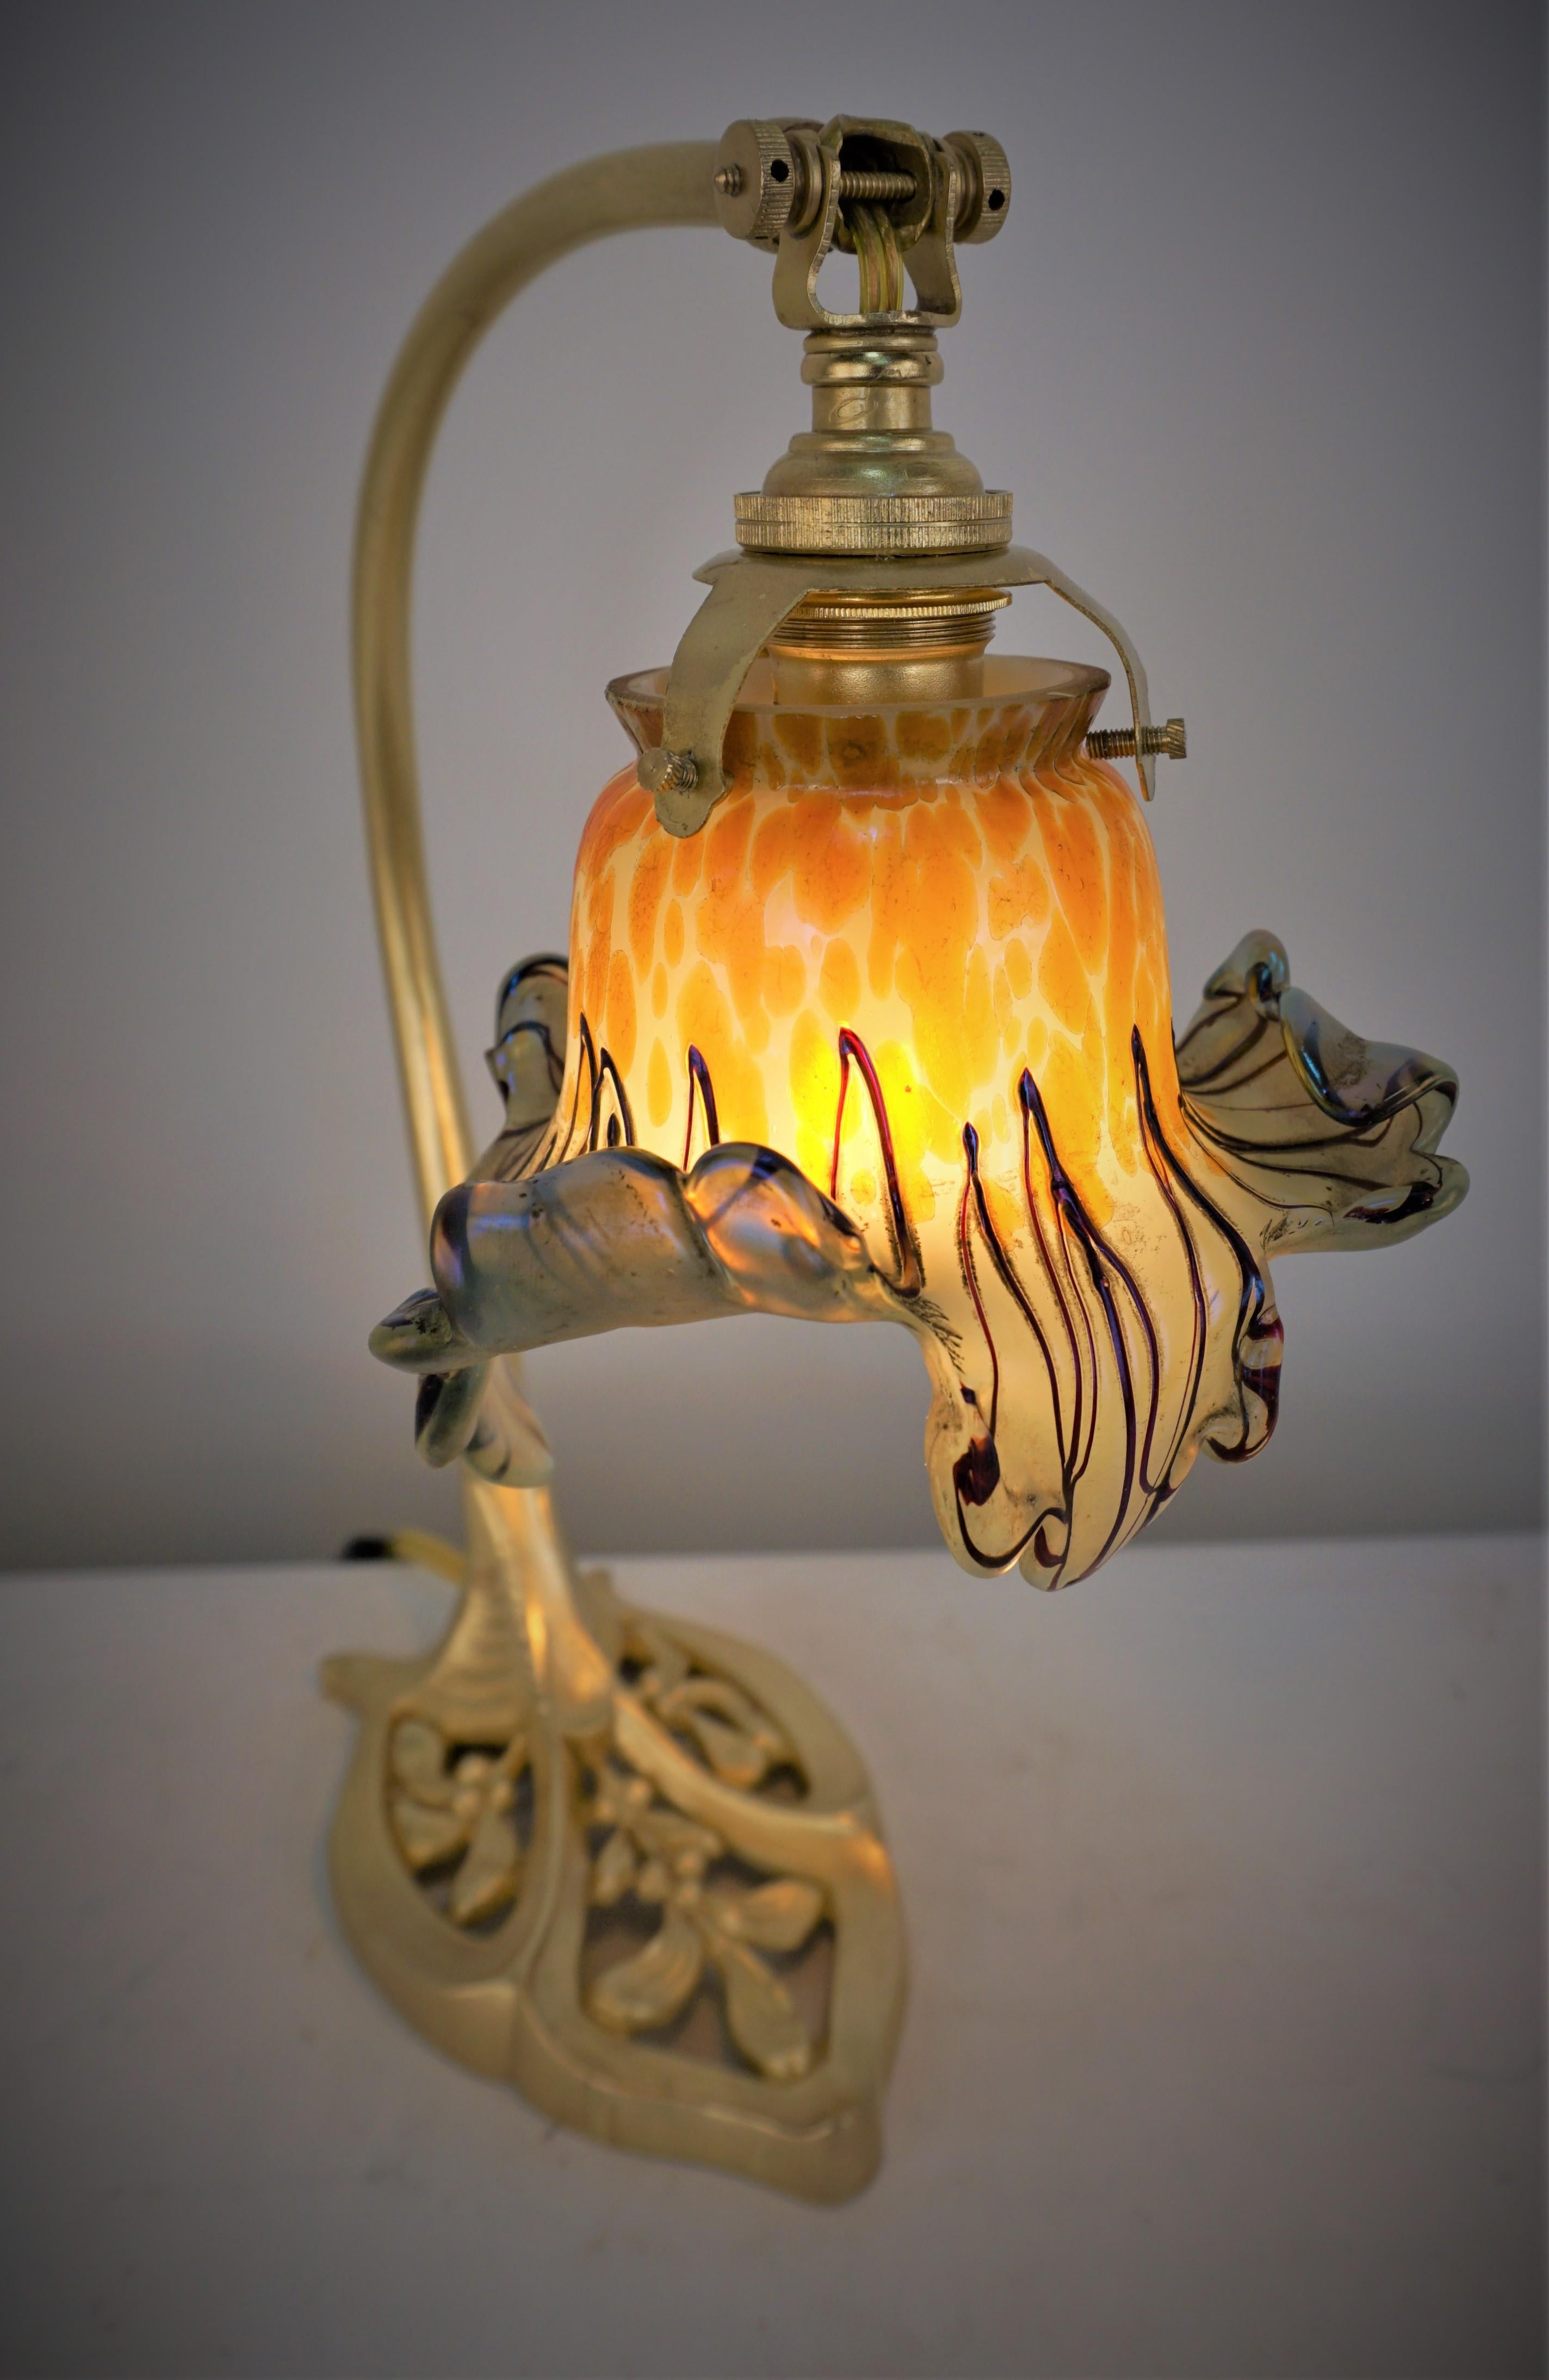 Dore bronze art nouveau table lamp with beautiful multi color hand blown glass shade.
Professionally rewired. 